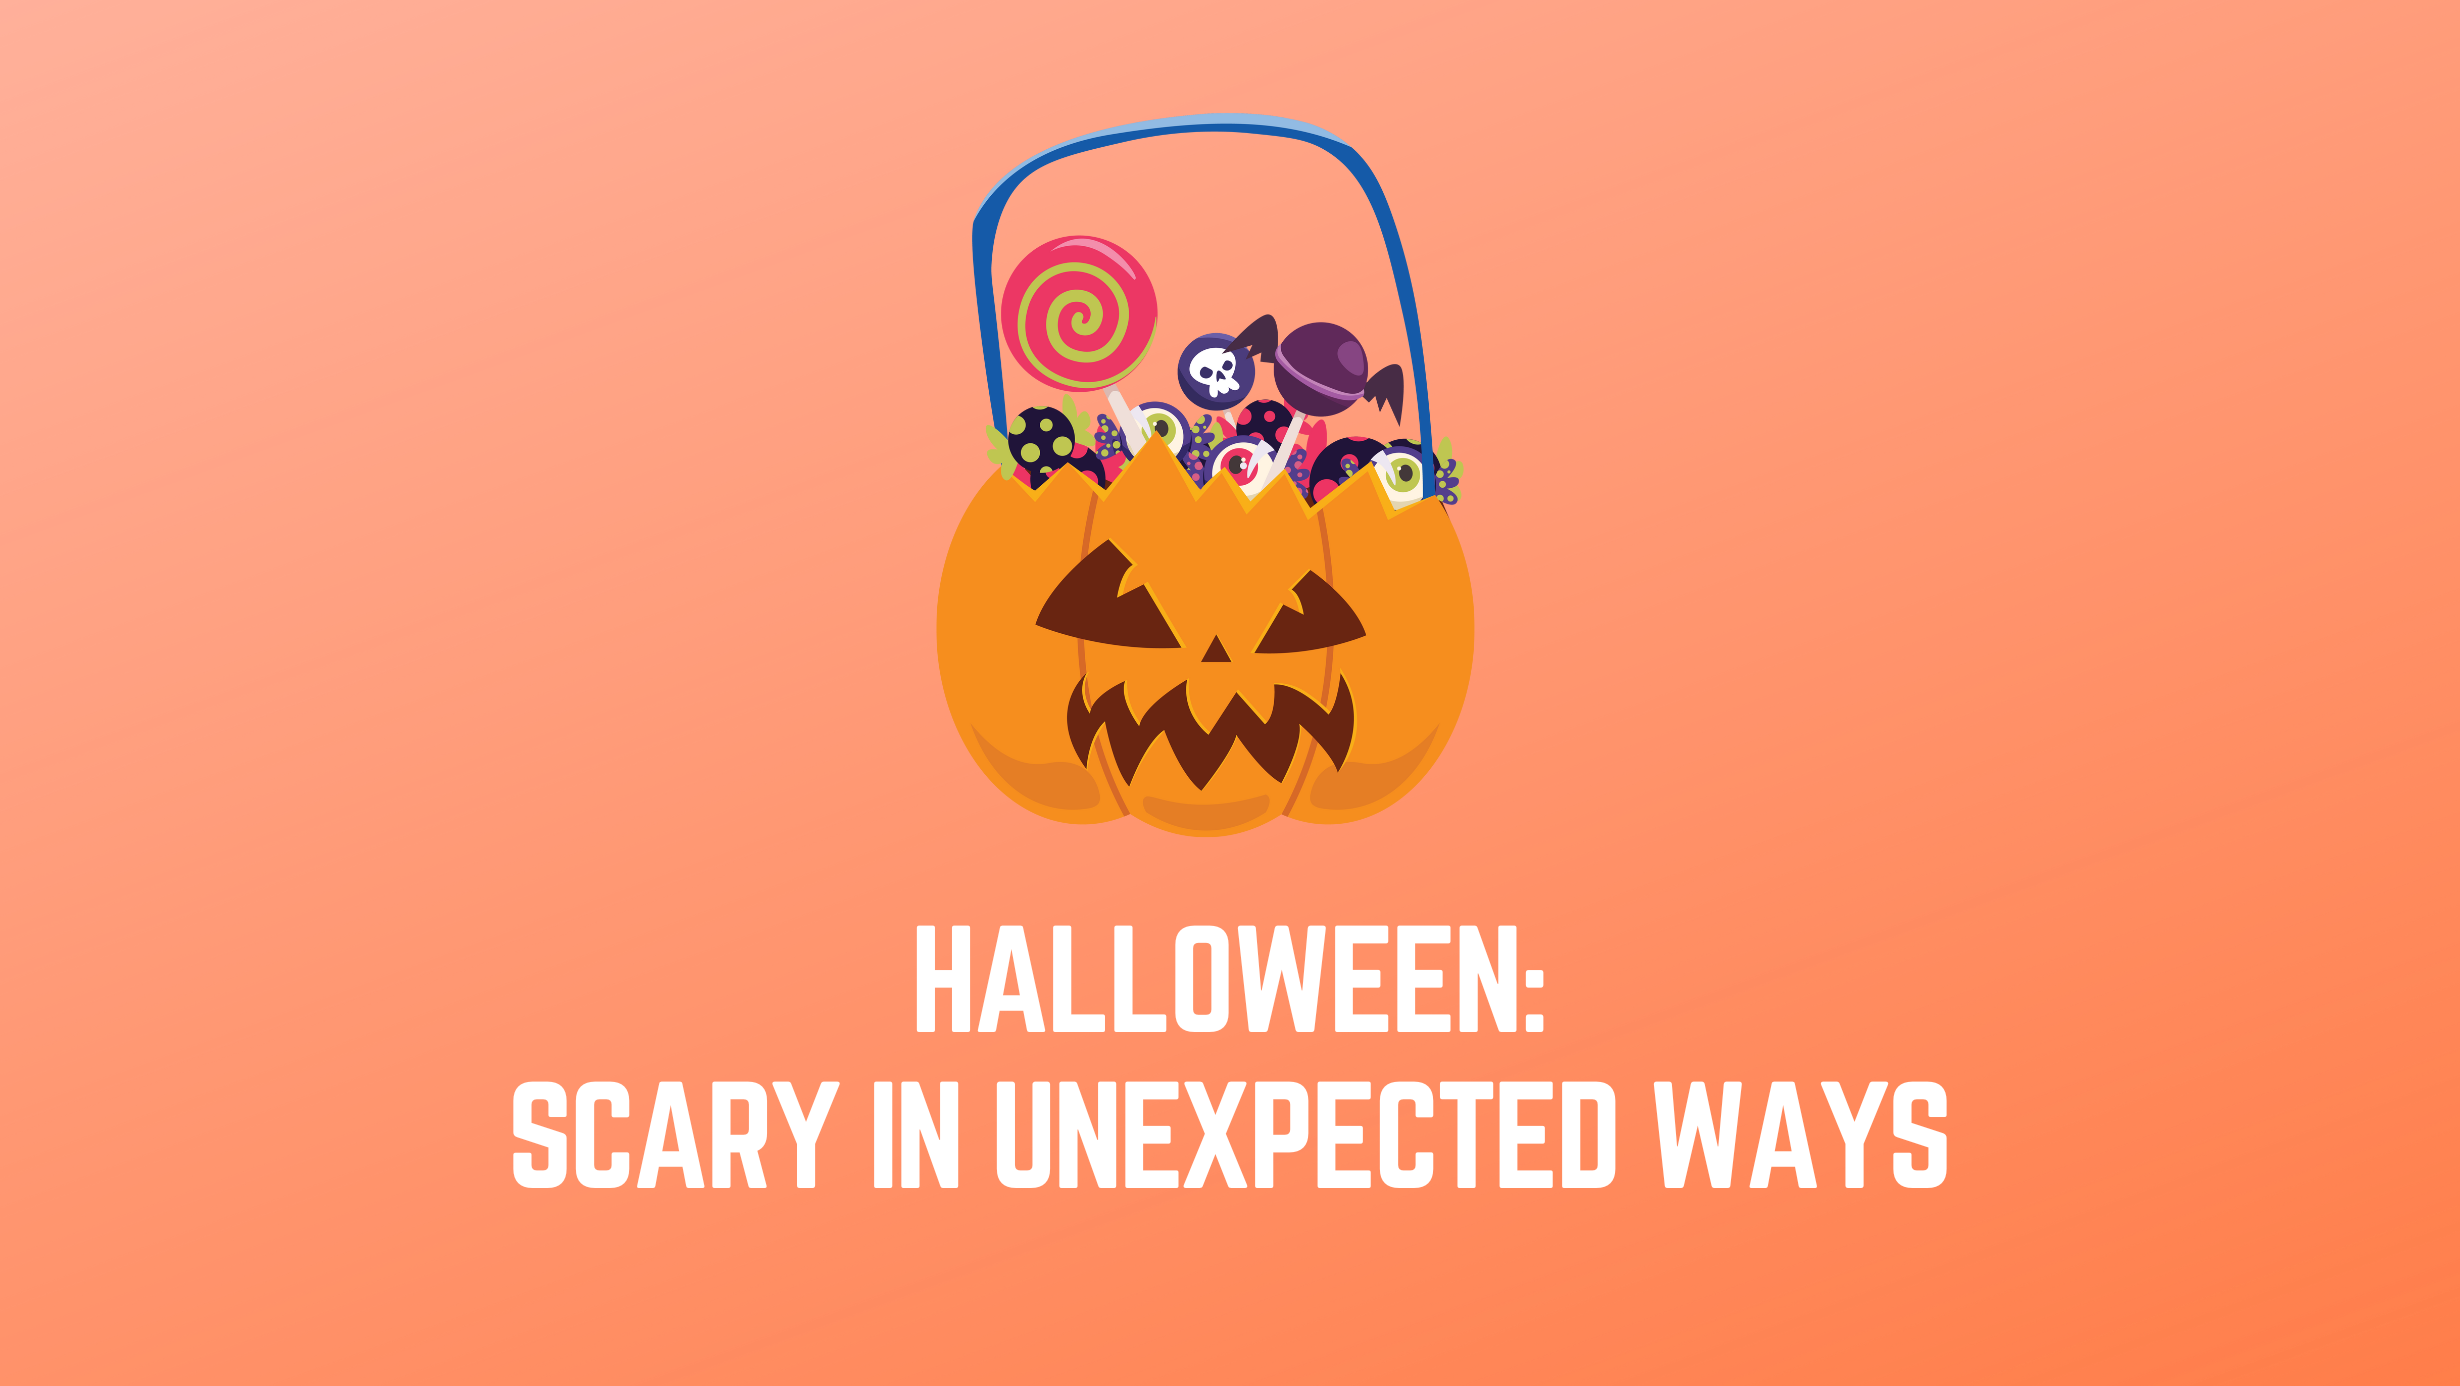 Halloween: Scary in Unexpected Ways. Scary jack-o'-lantern trick-or-treating container contains candy that needs to be checked for food allergy safety